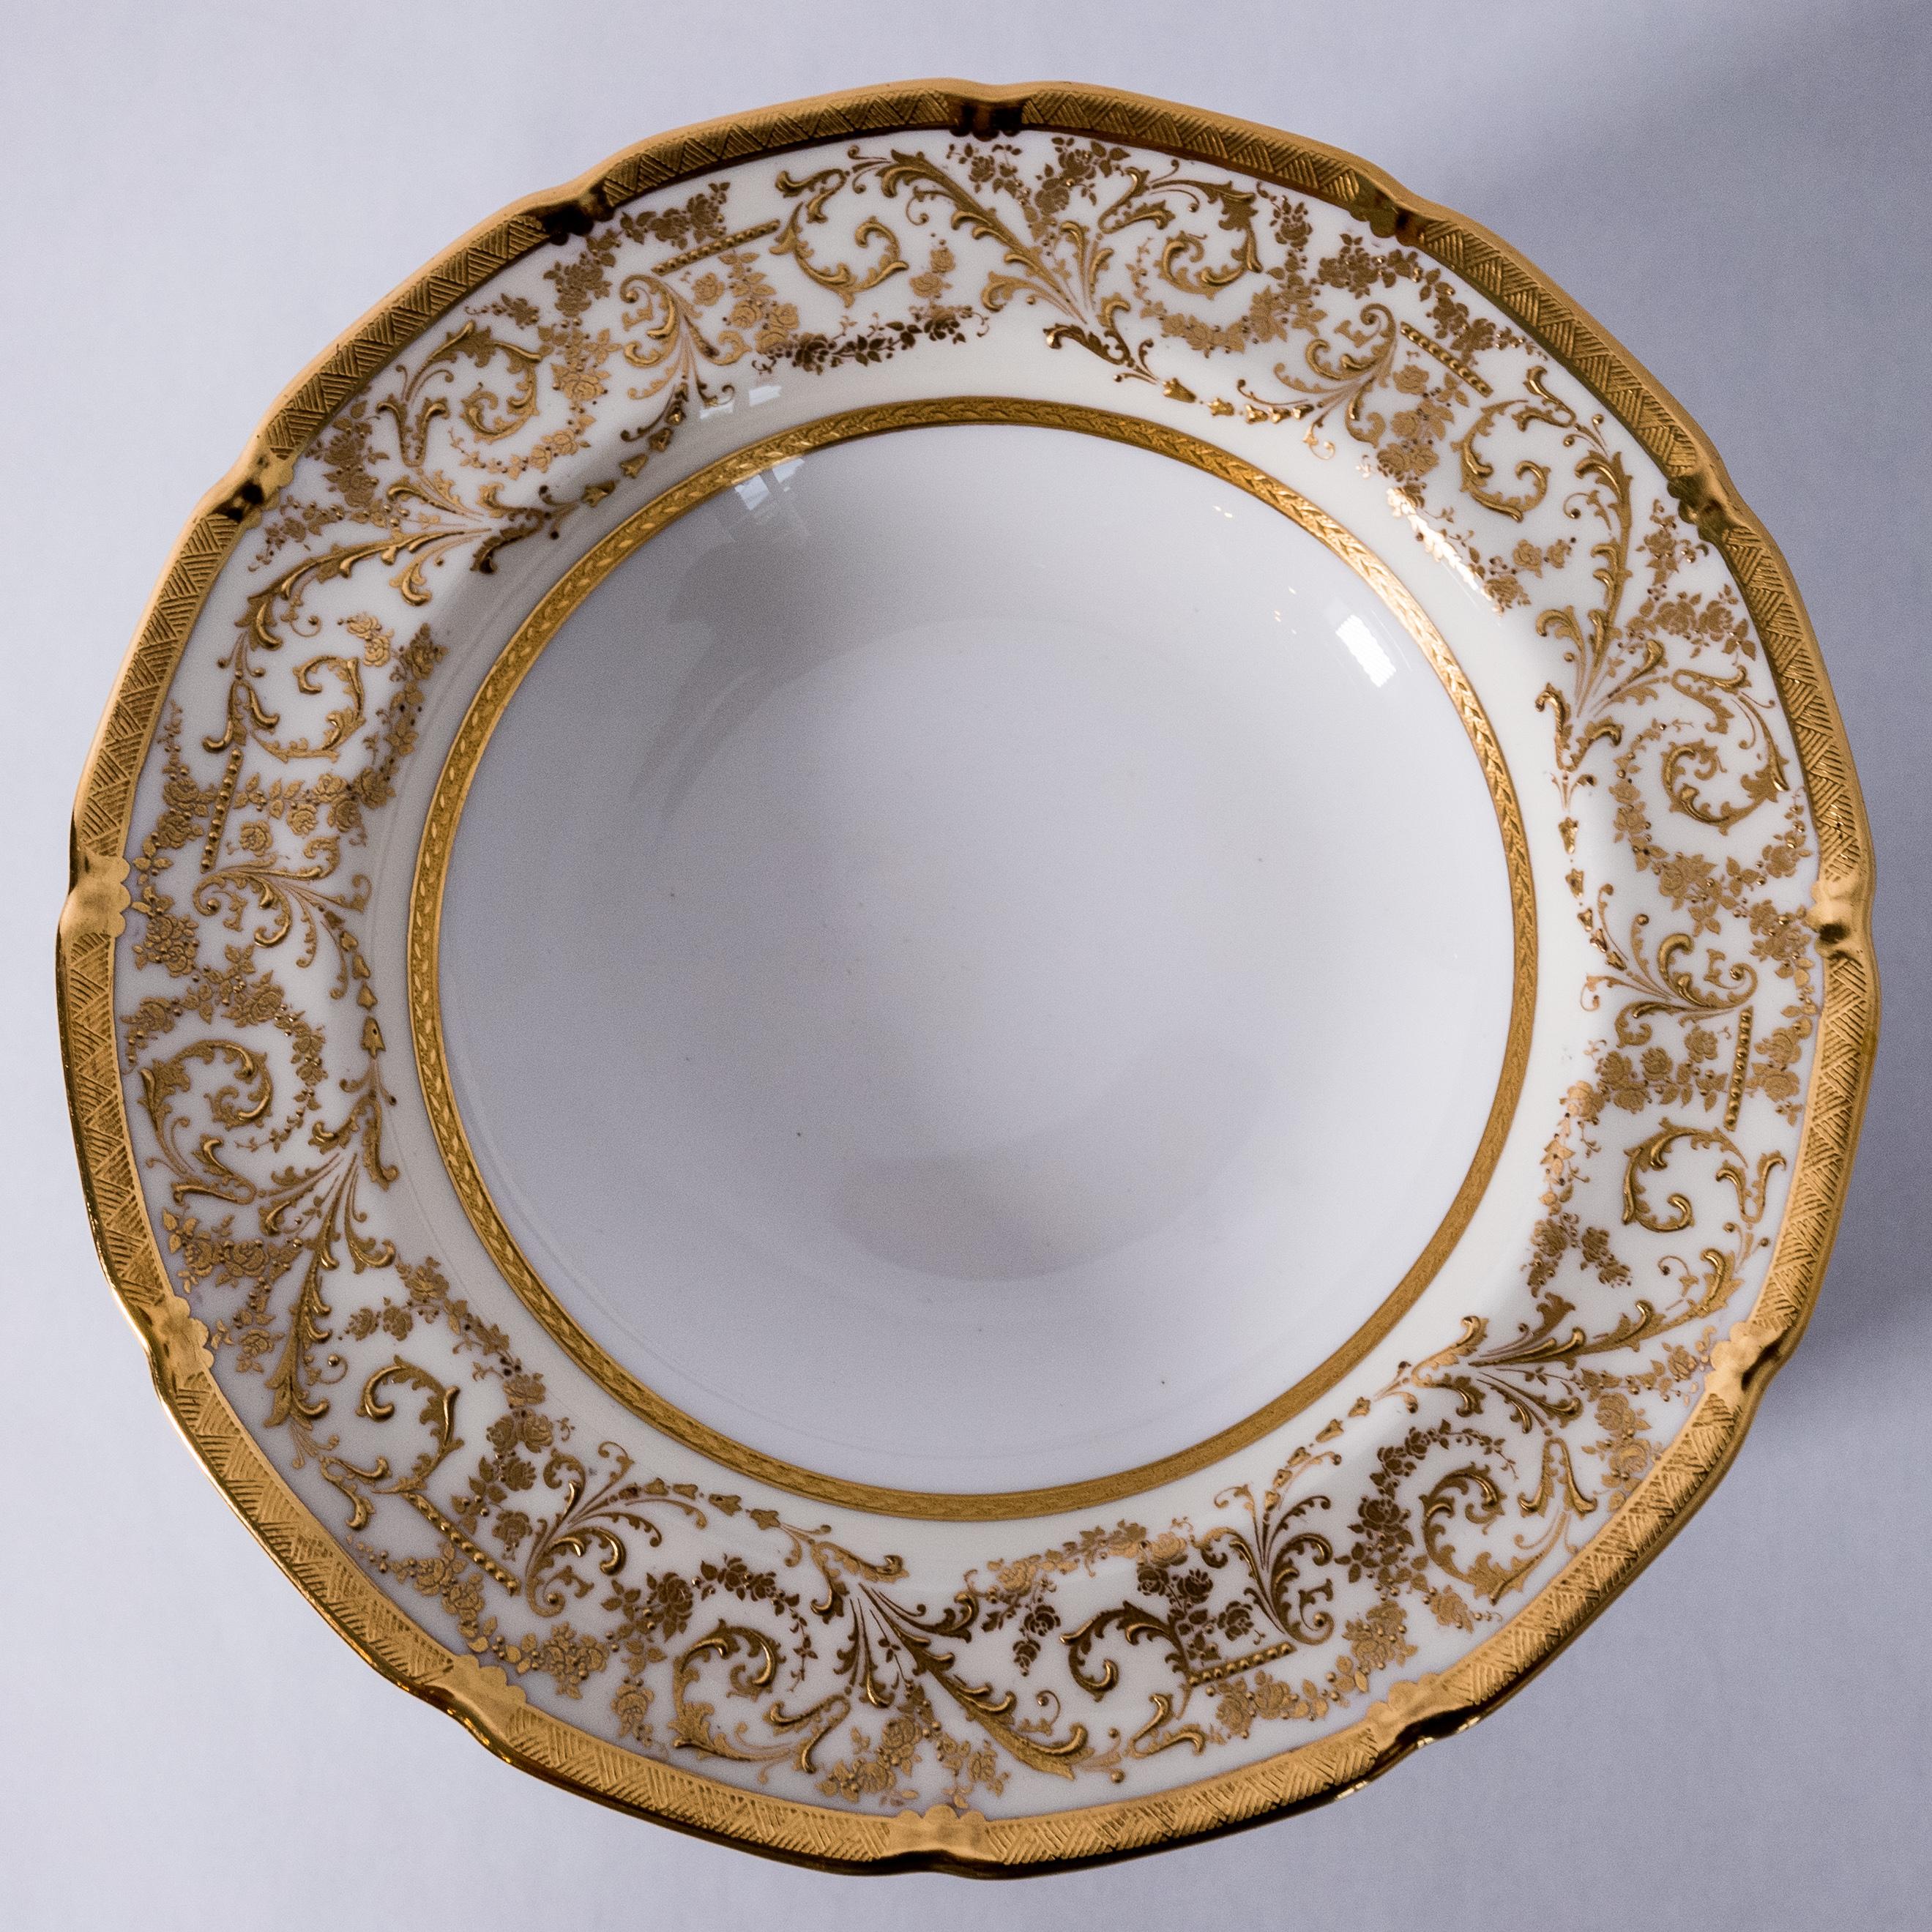 A great set from Royal Doulton, England Circa 1910 and custom ordered through the fine Gilded Age Retailer Marshall Fields Chicago. A go to size for soup, pasta, salads, ice cream or desserts with sauce. This set is in amazing condition and features